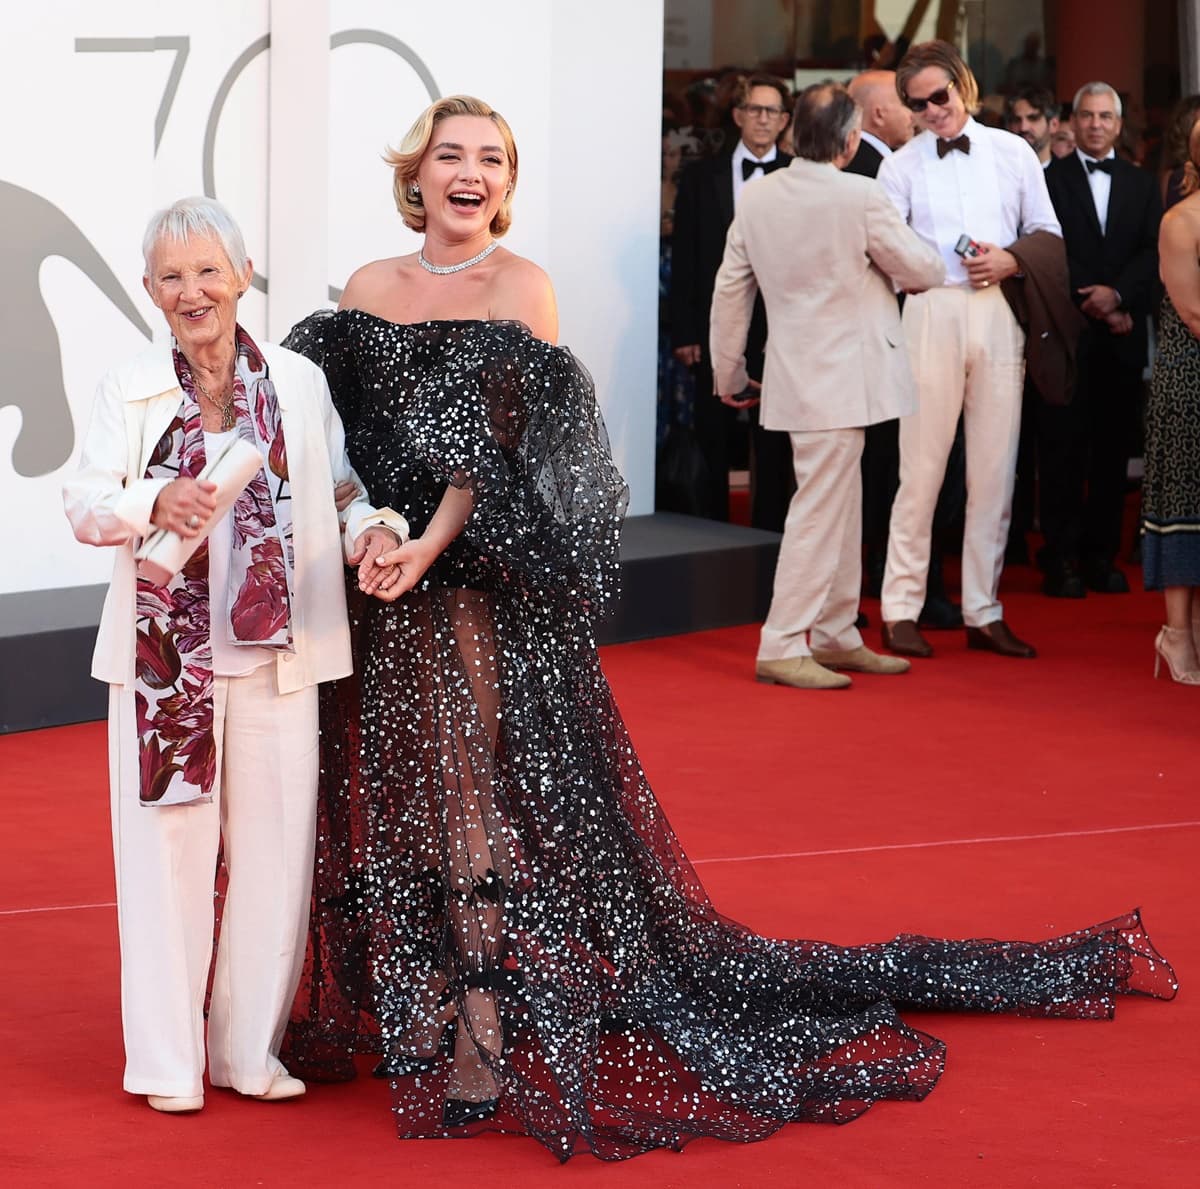 Florence Pugh was joined by her legendary grandmother, Pat, at the Don't Worry Darling film premiere